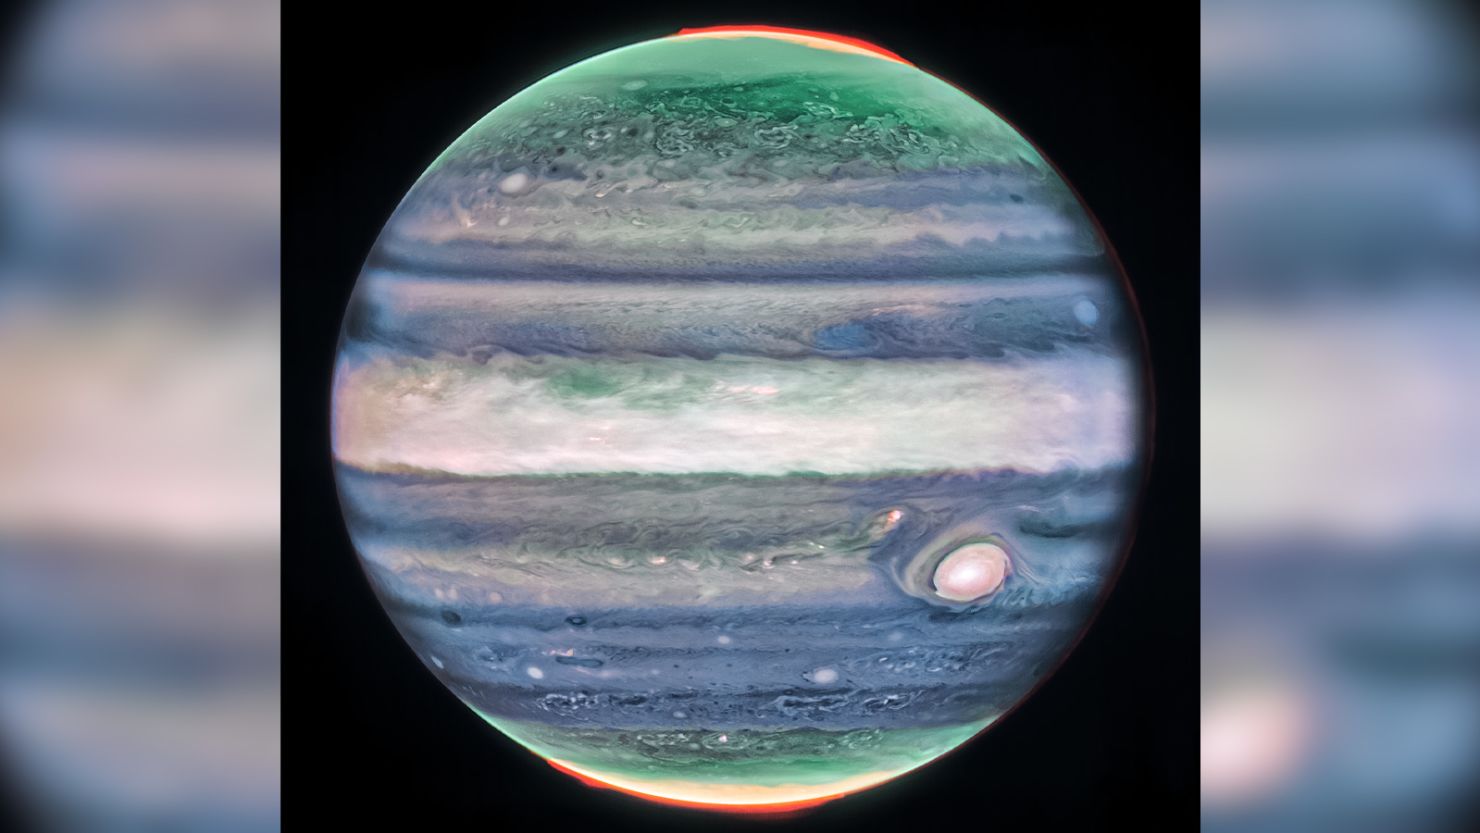 The James Webb Space Telescope’s Near-Infrared Camera captured an image of Jupiter in infrared light. The bright white spots and streaks are likely high-altitude cloud tops of storms. Auroras, shown in red, can be seen around the poles.